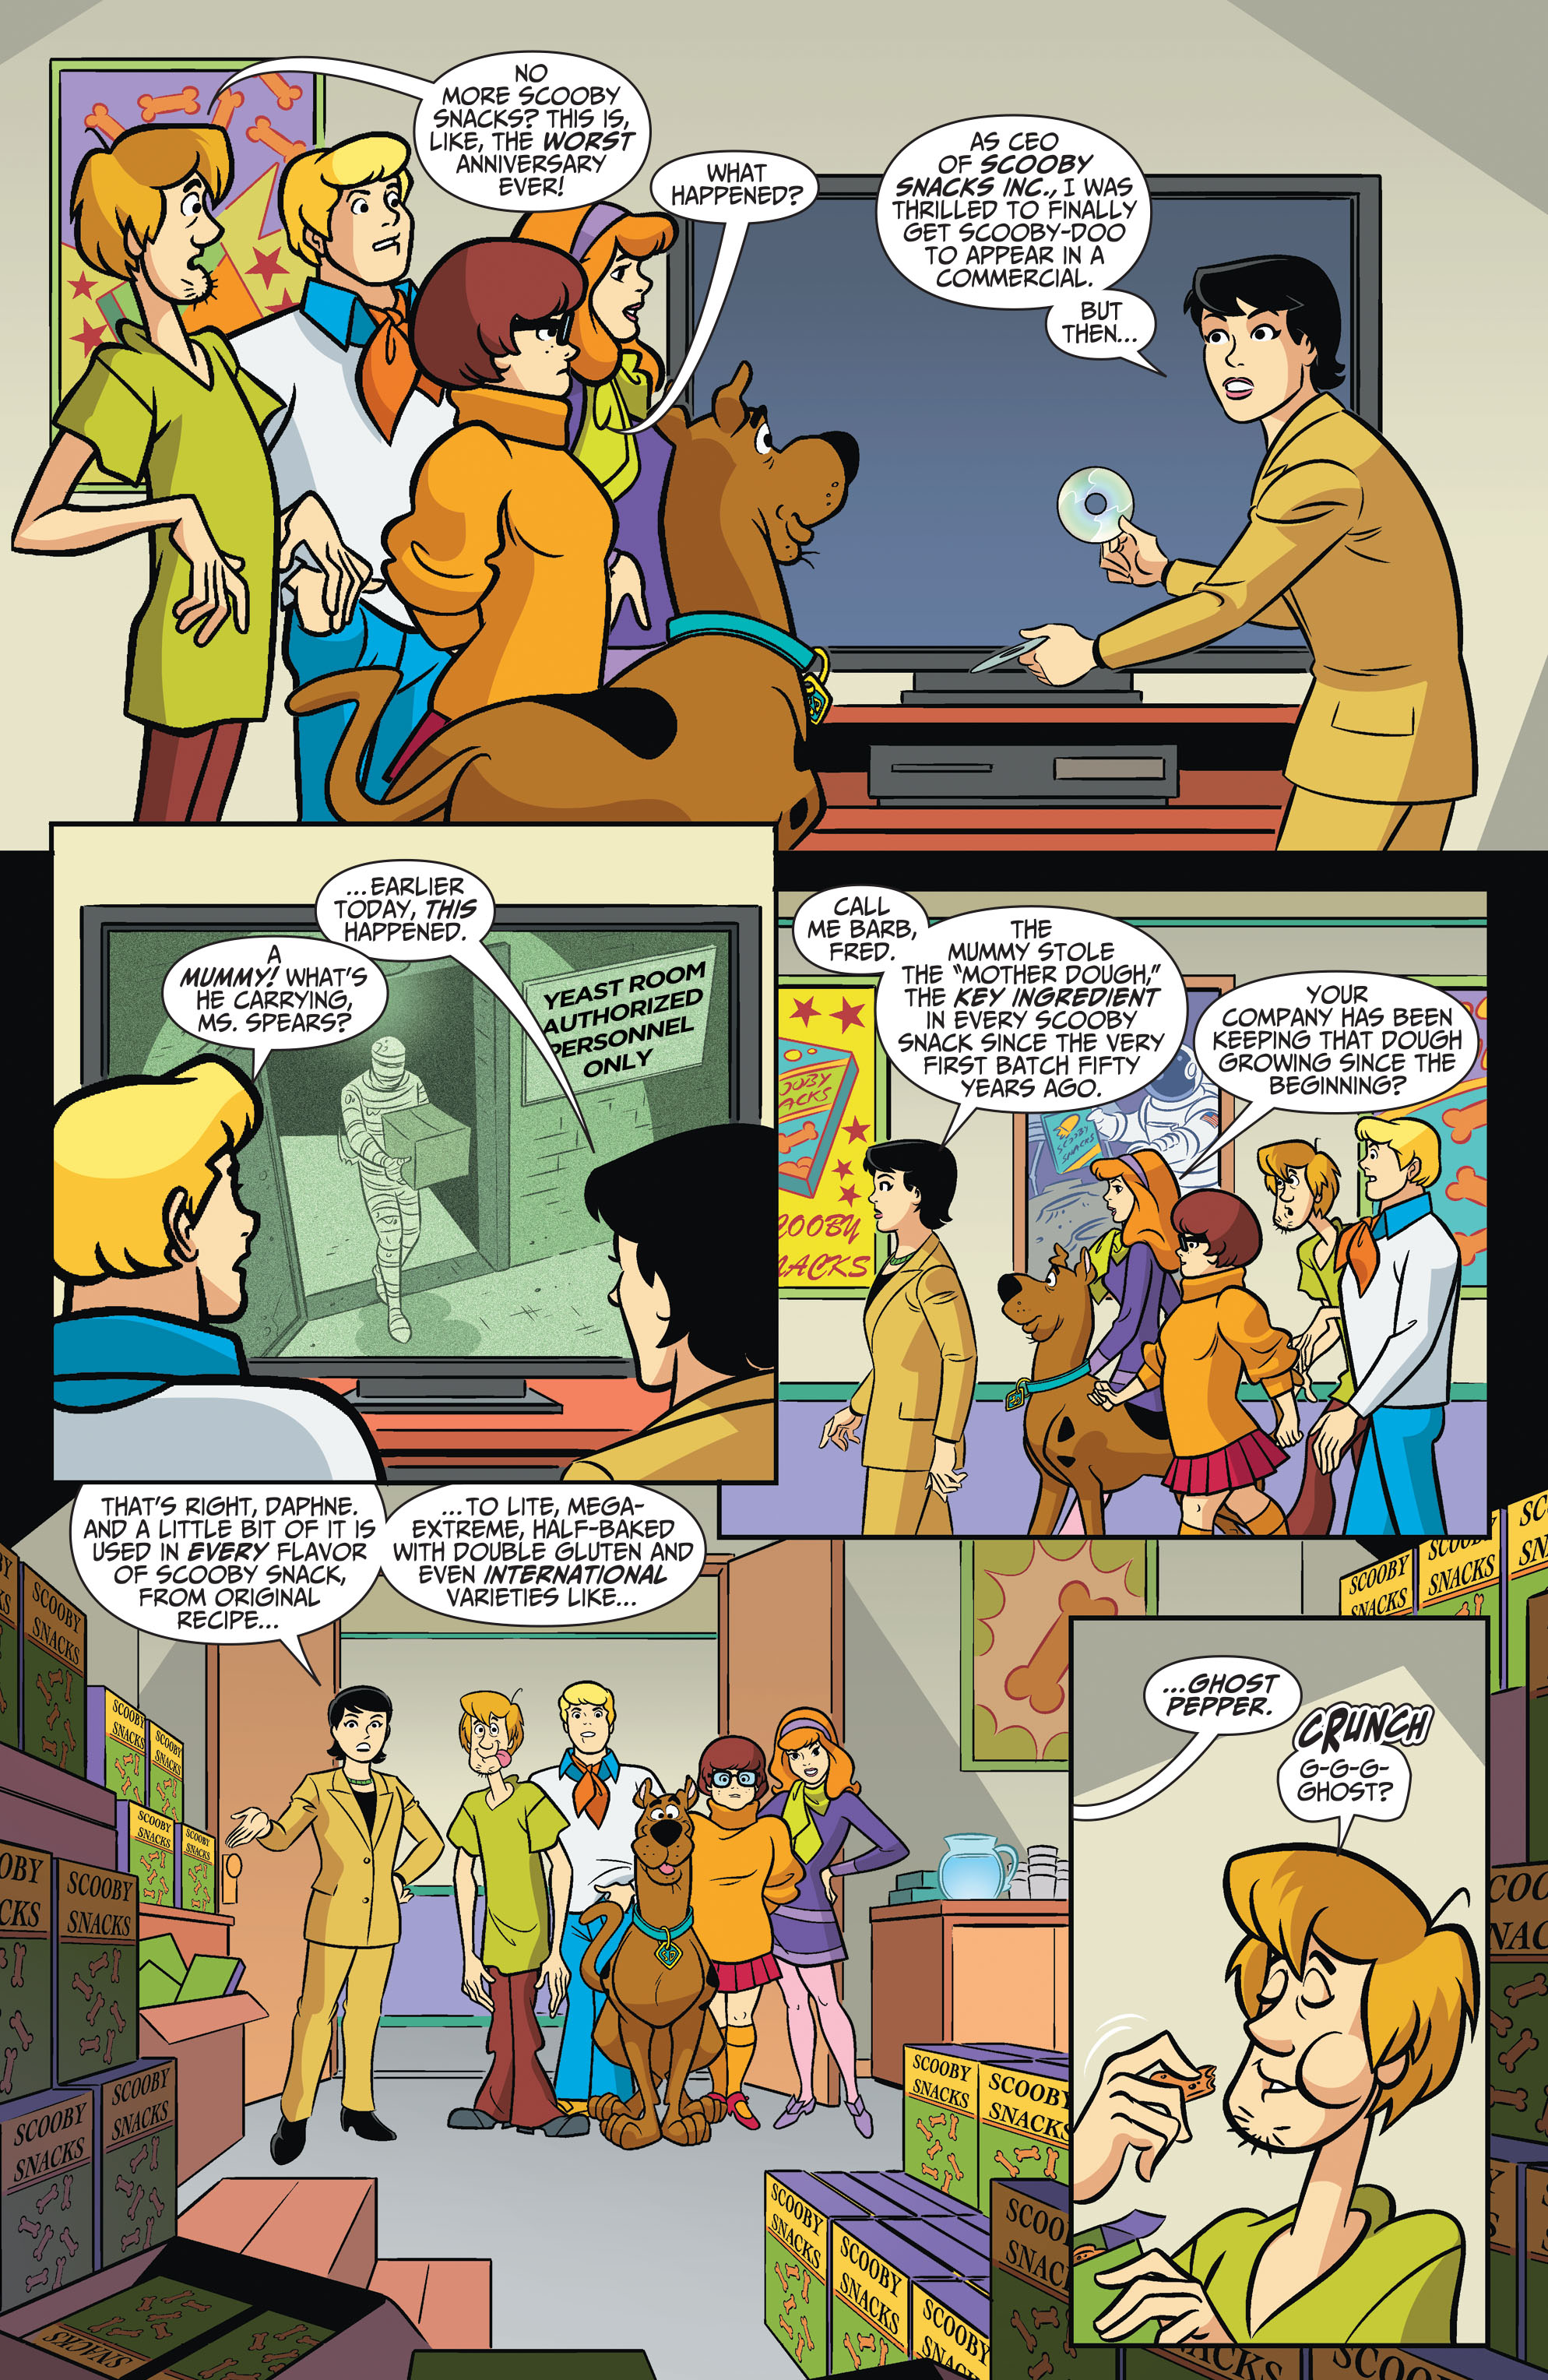 Scooby-Doo: Mystery Inc. (2020-): Chapter 1 - Page 3